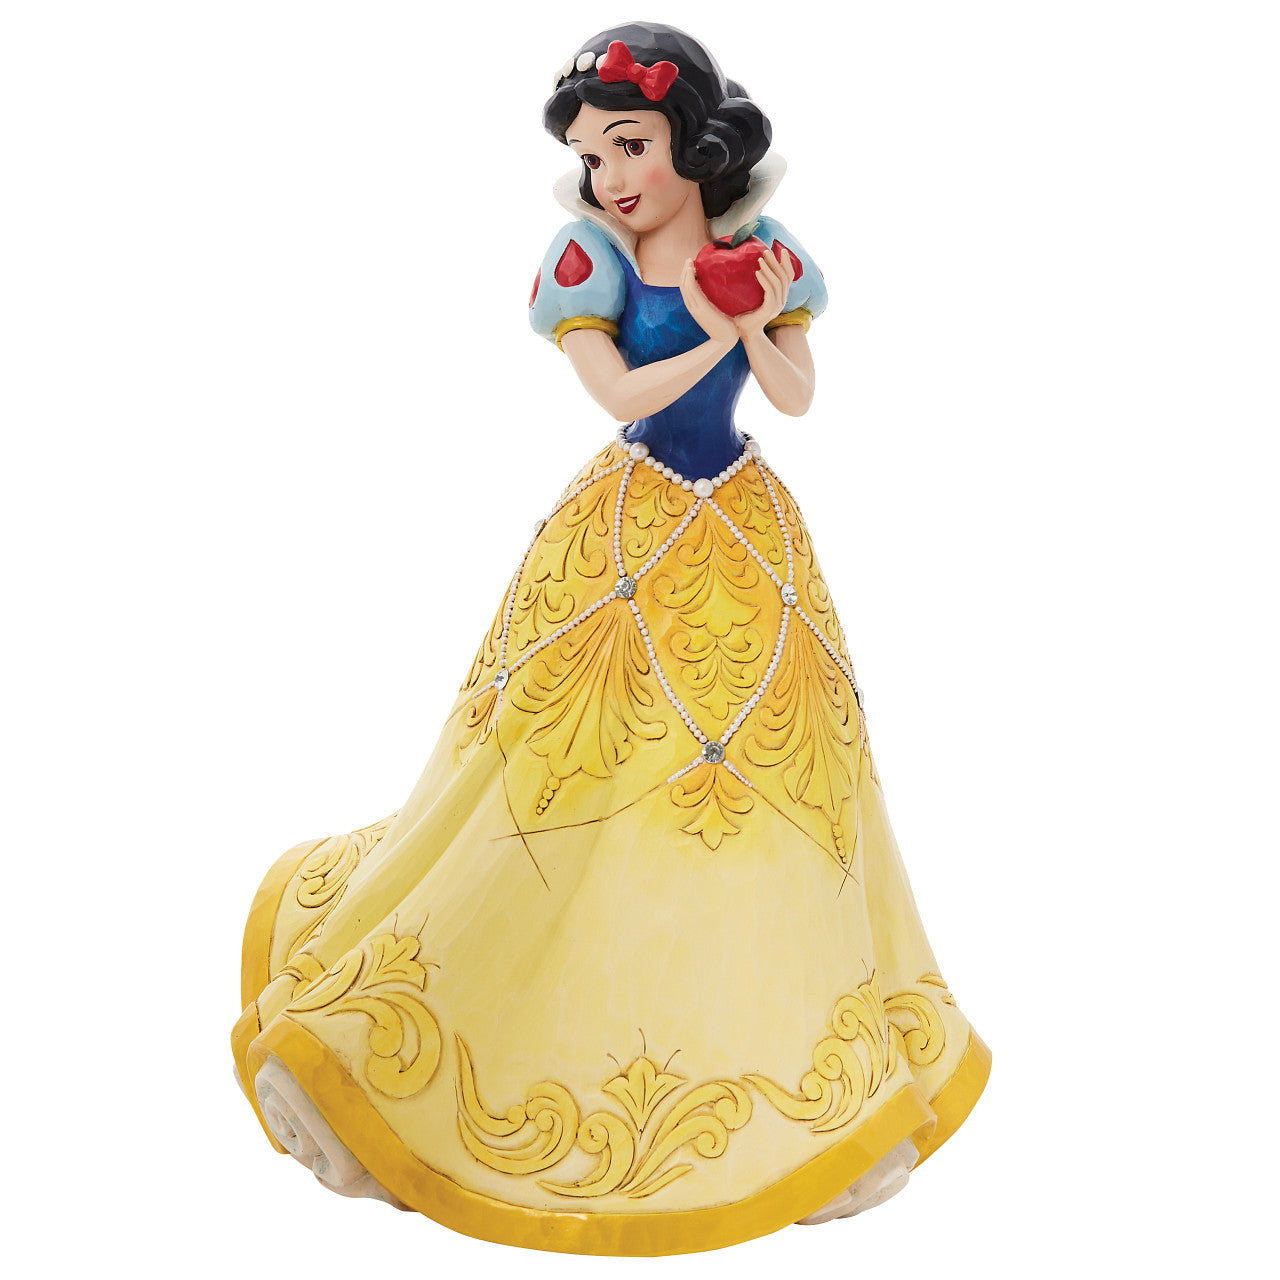 The Fairest of All - Snow White Deluxe Figurine